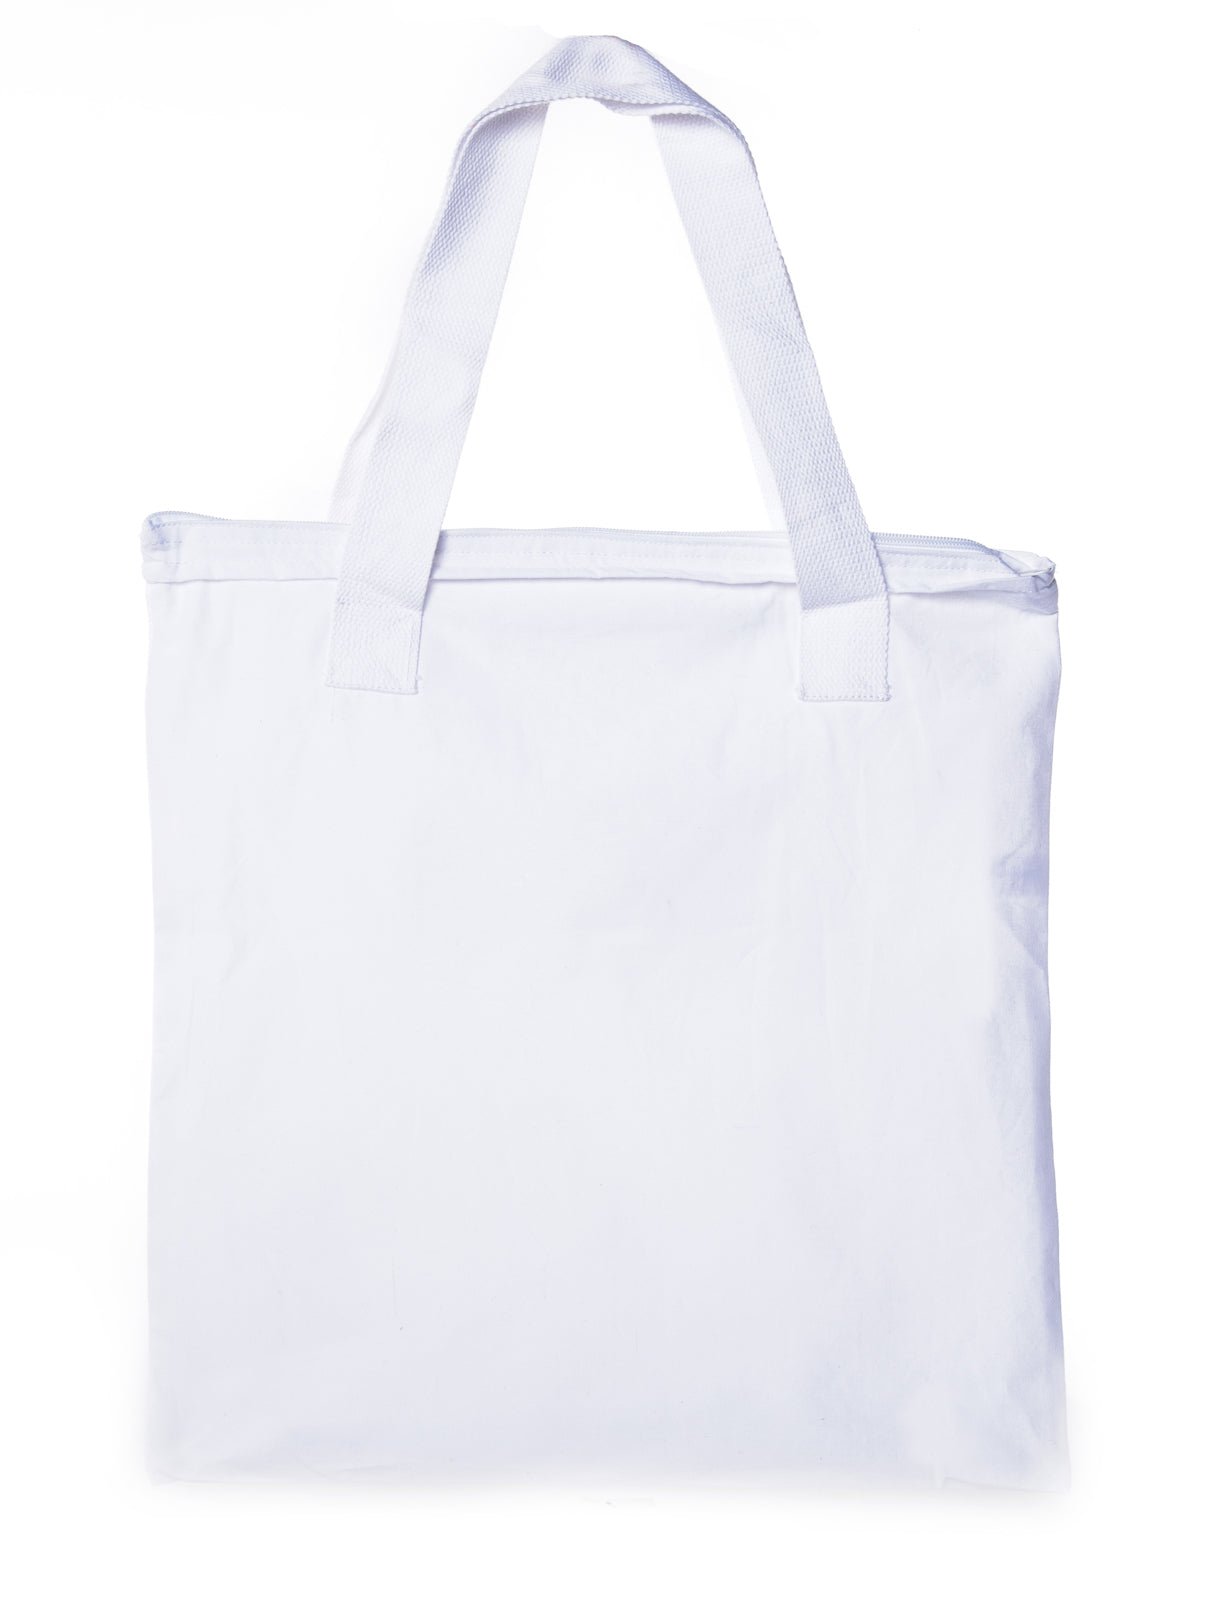 Westford Mill Bags - Shop all items